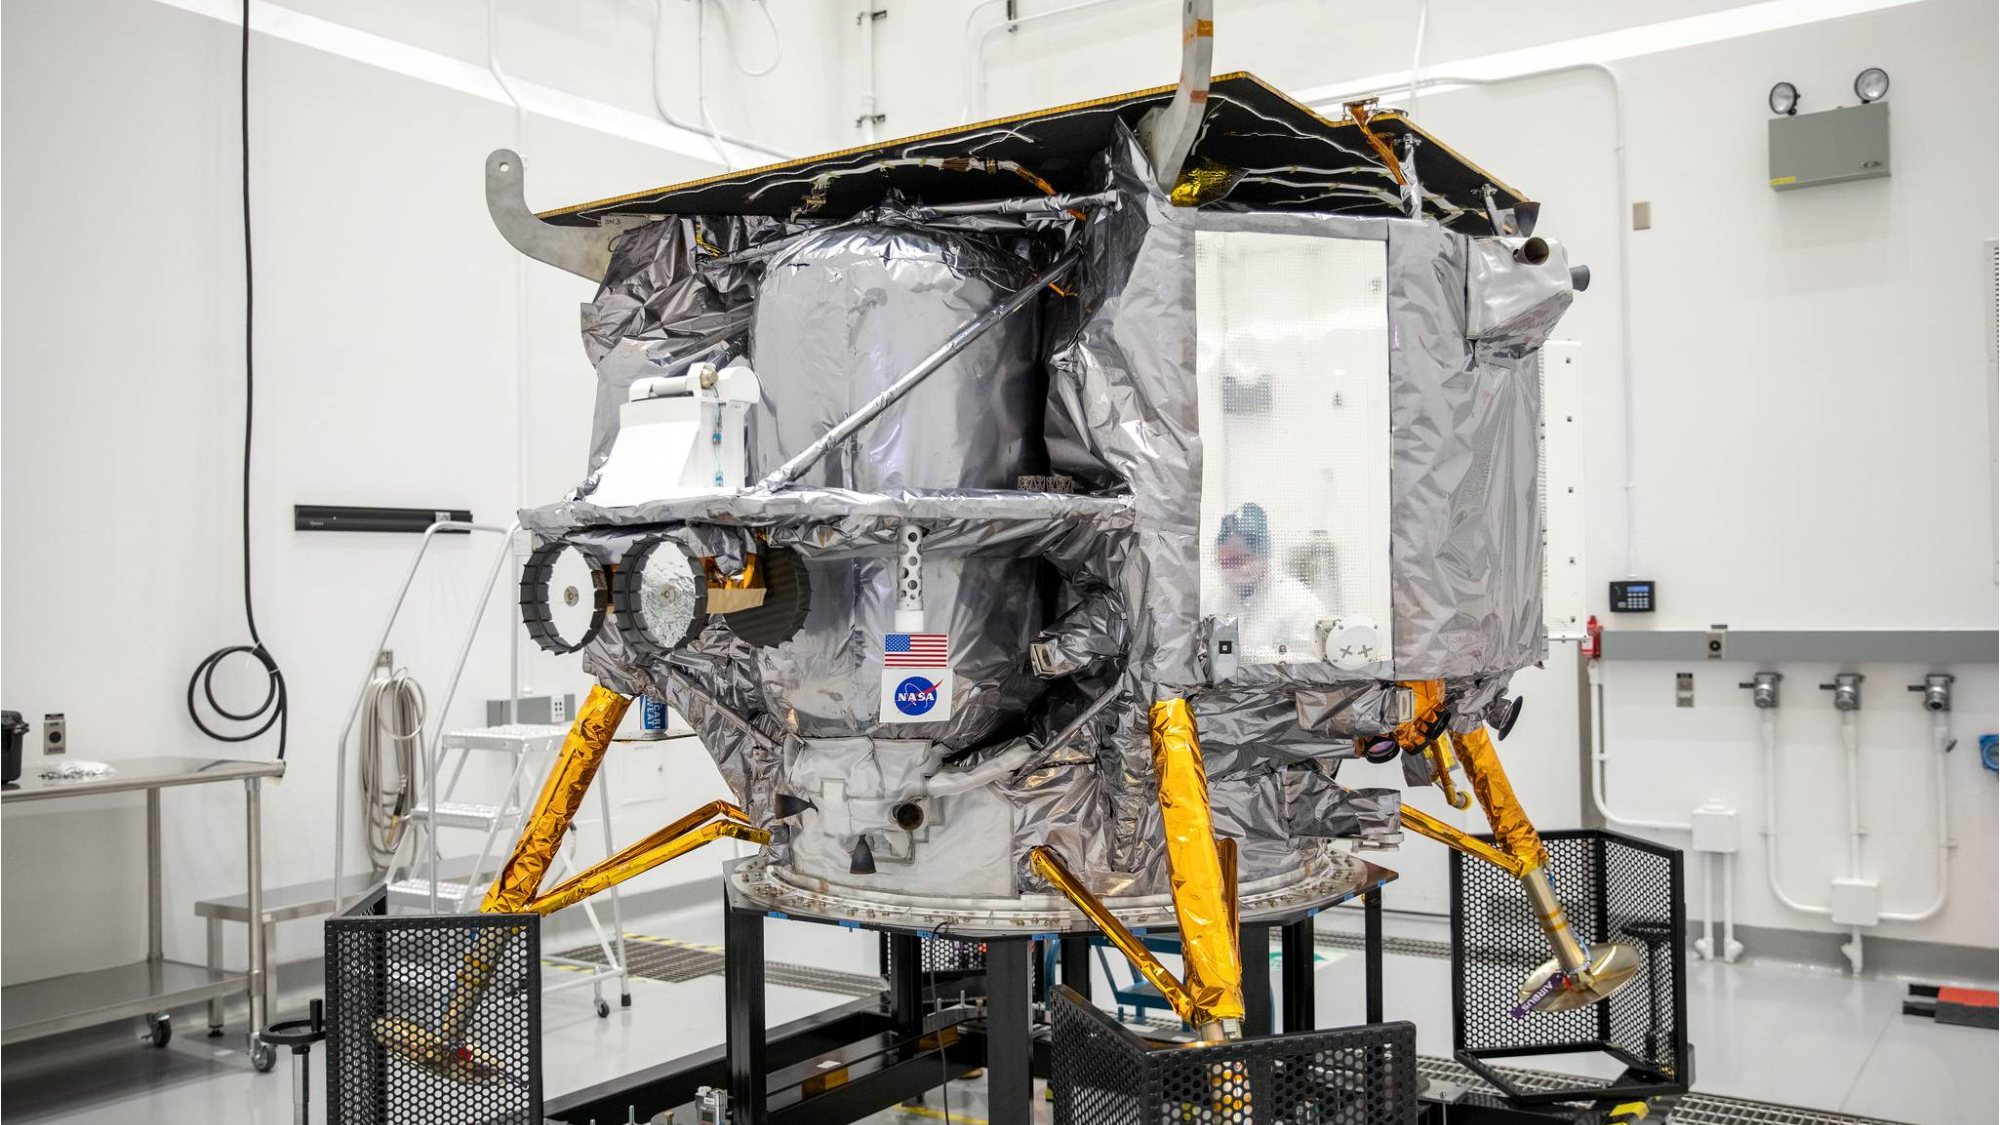 Stuck valve may have doomed private Peregrine moon lander mission, Astrobotic says Space